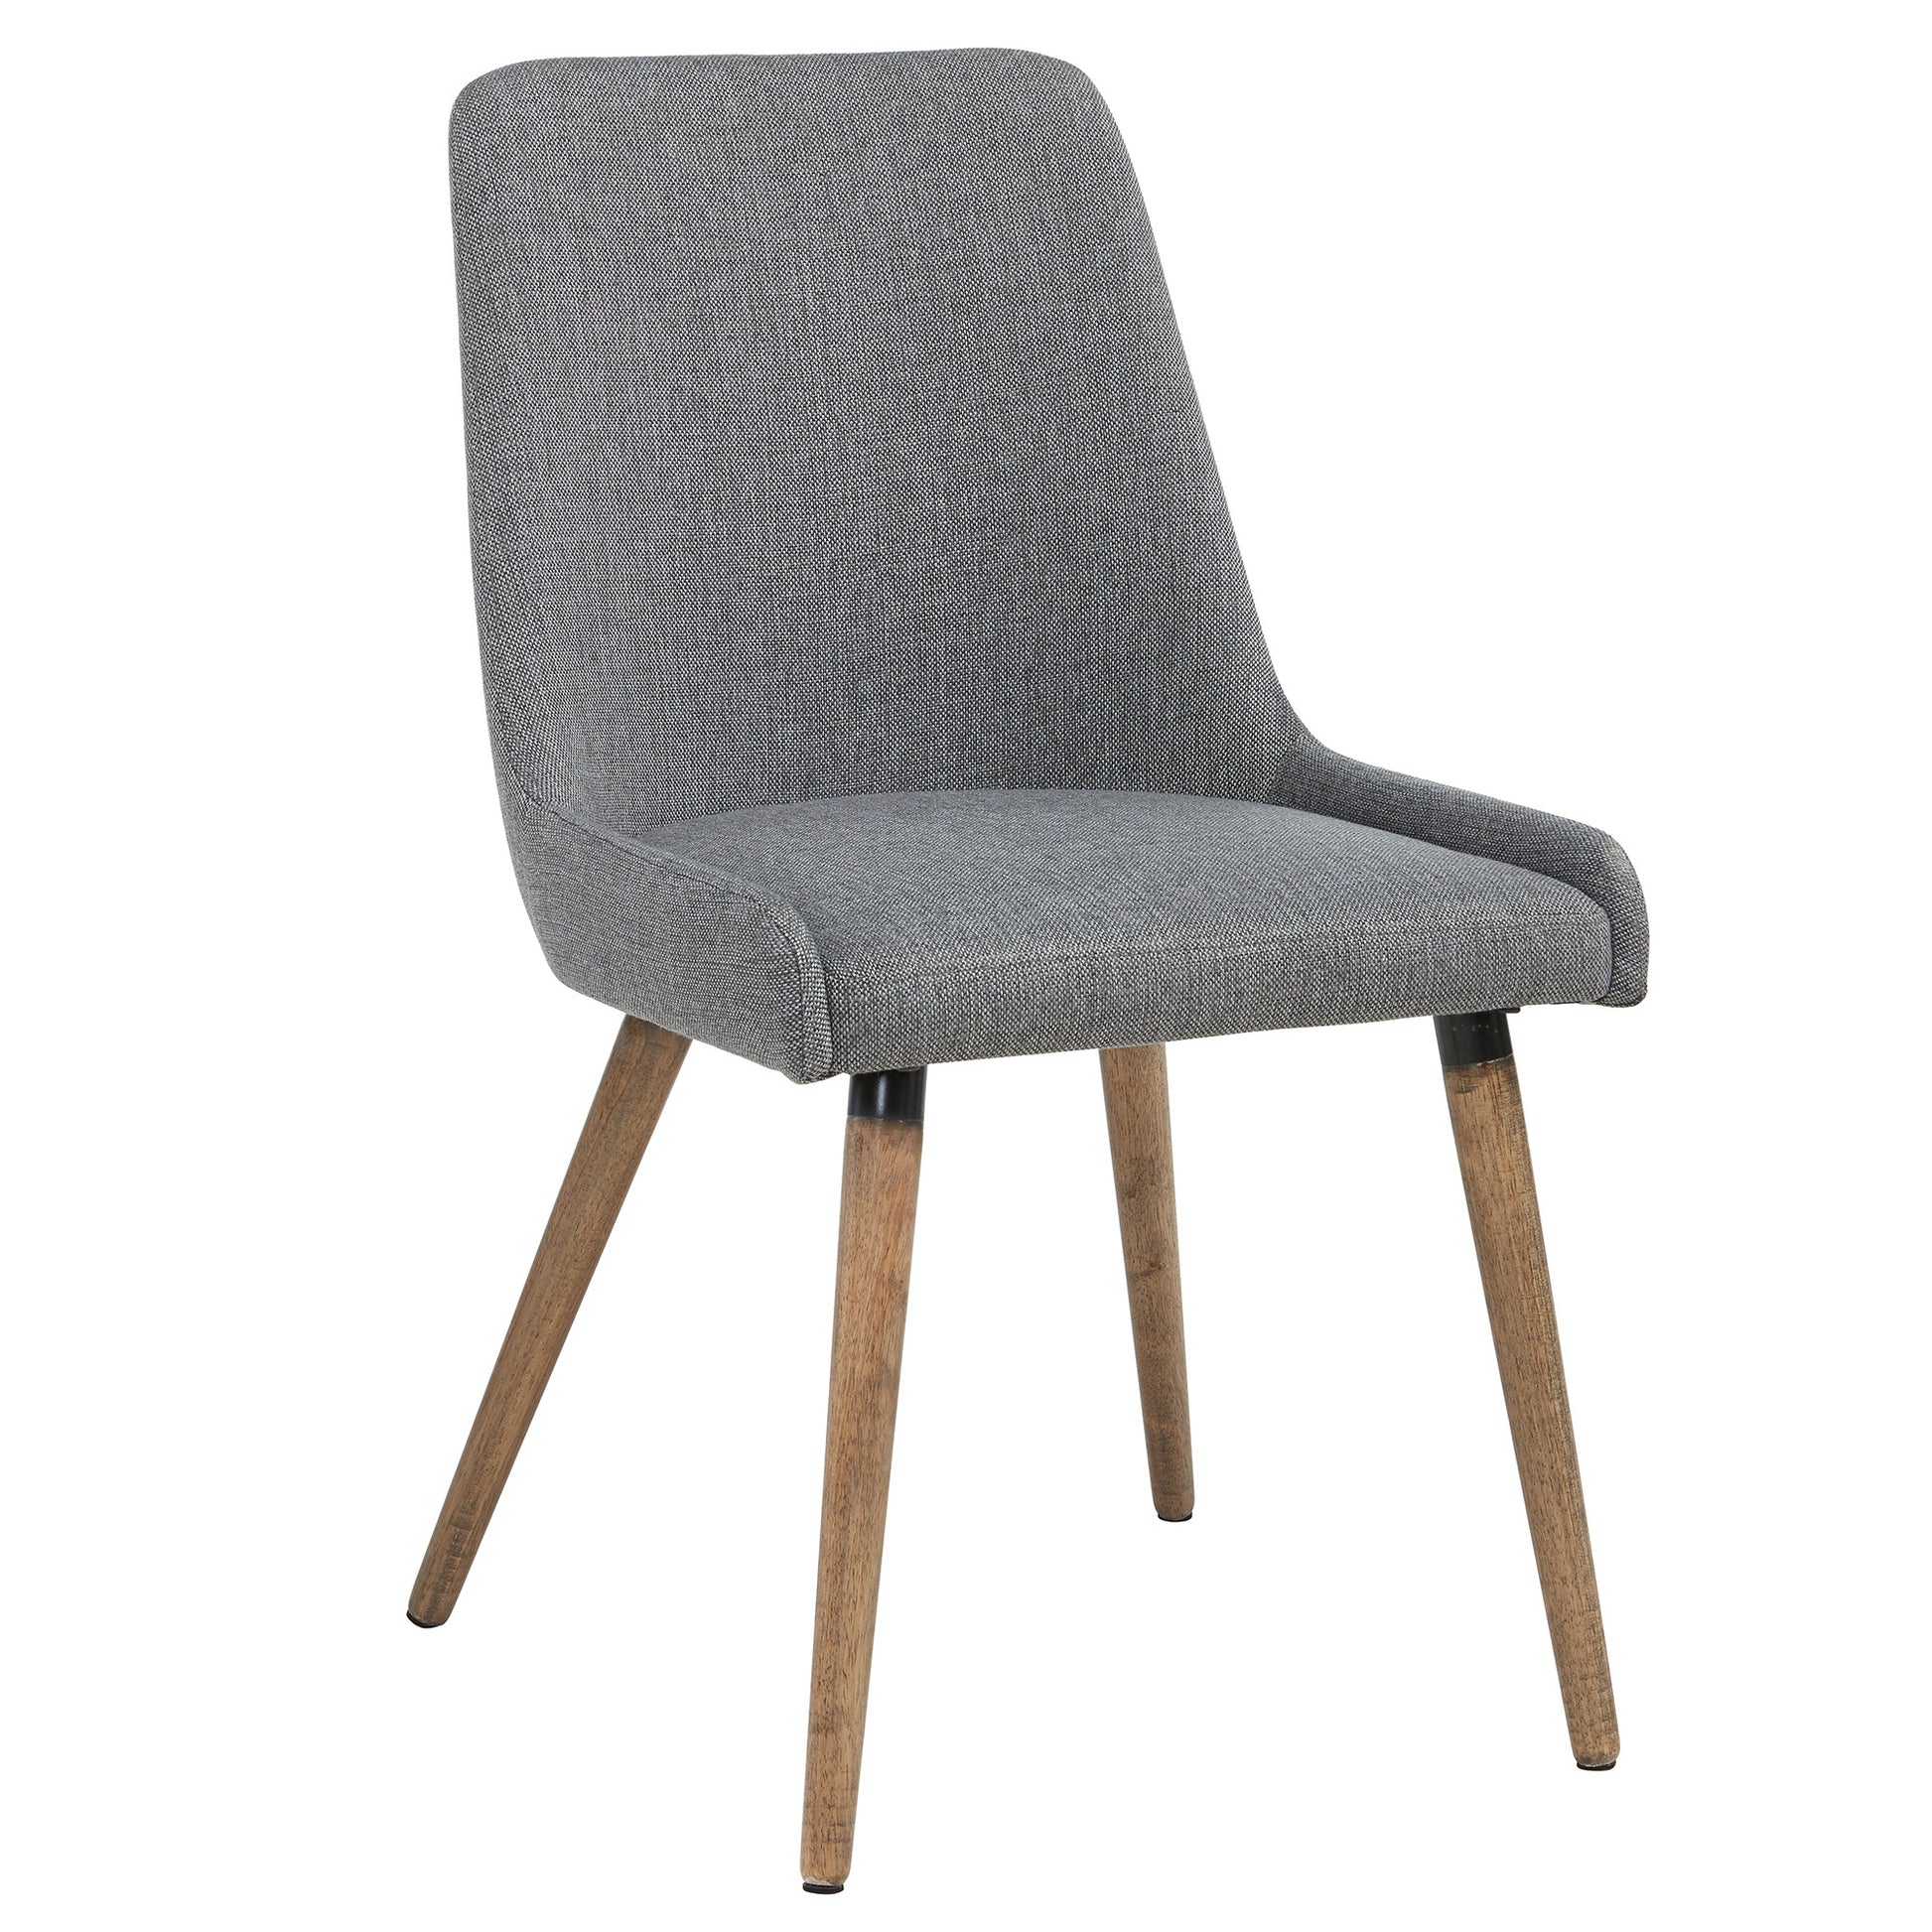 â€¢ Mid-century modern styling â€¢ Sturdy metal chair frame, foam seat cushion, upholstered in dark grey fabric â€¢ Solid rubberwood legs in a washed grey finish â€¢ Mix and match with a variety of table styles â€¢ Approximate weight capacity is 250 lbs; seat height is 18.5"